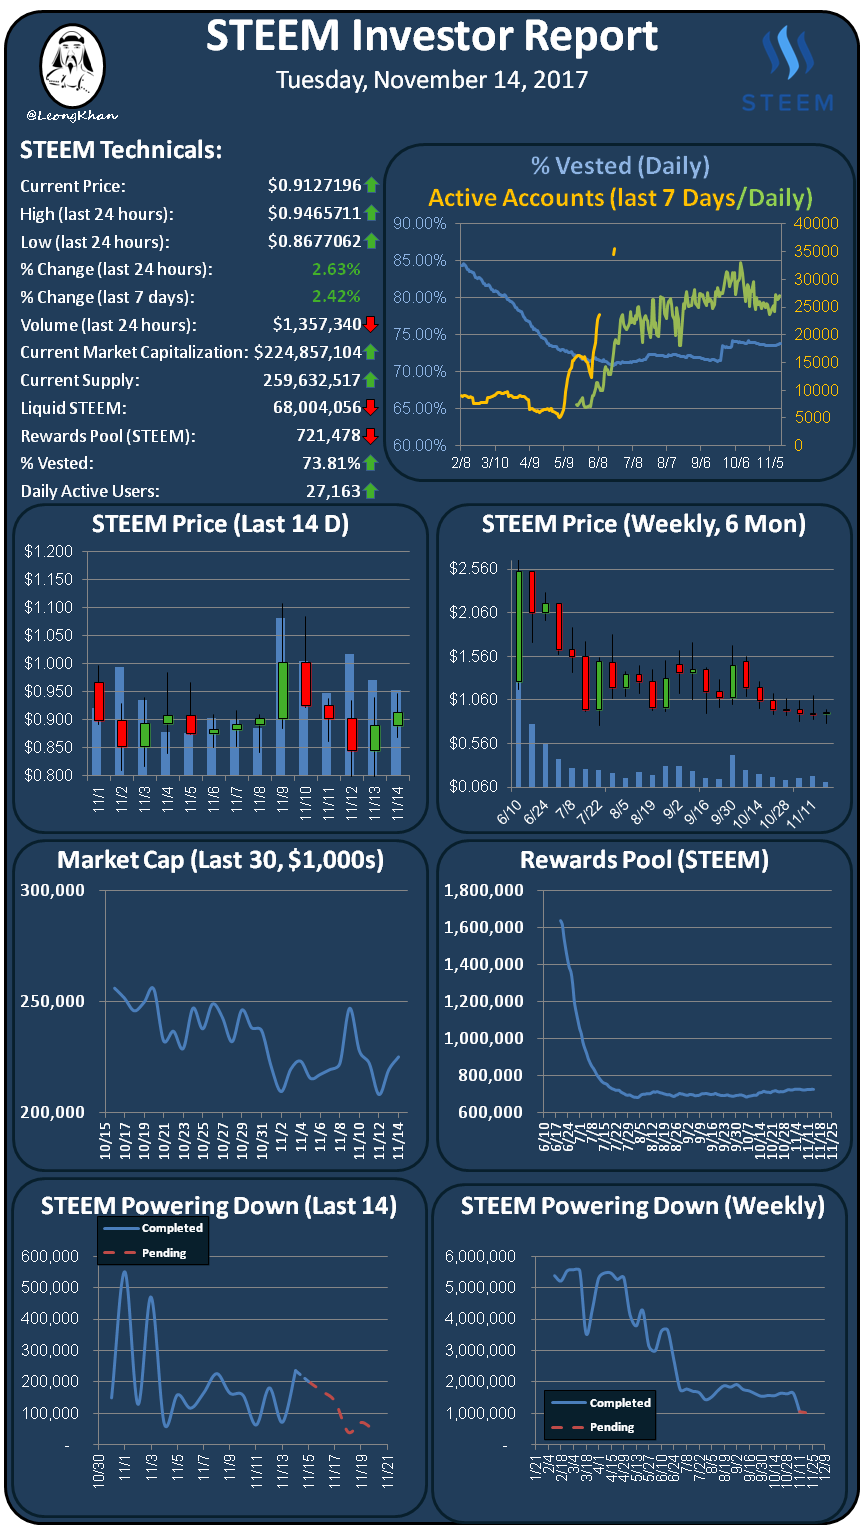 Investment Report 20171114.png